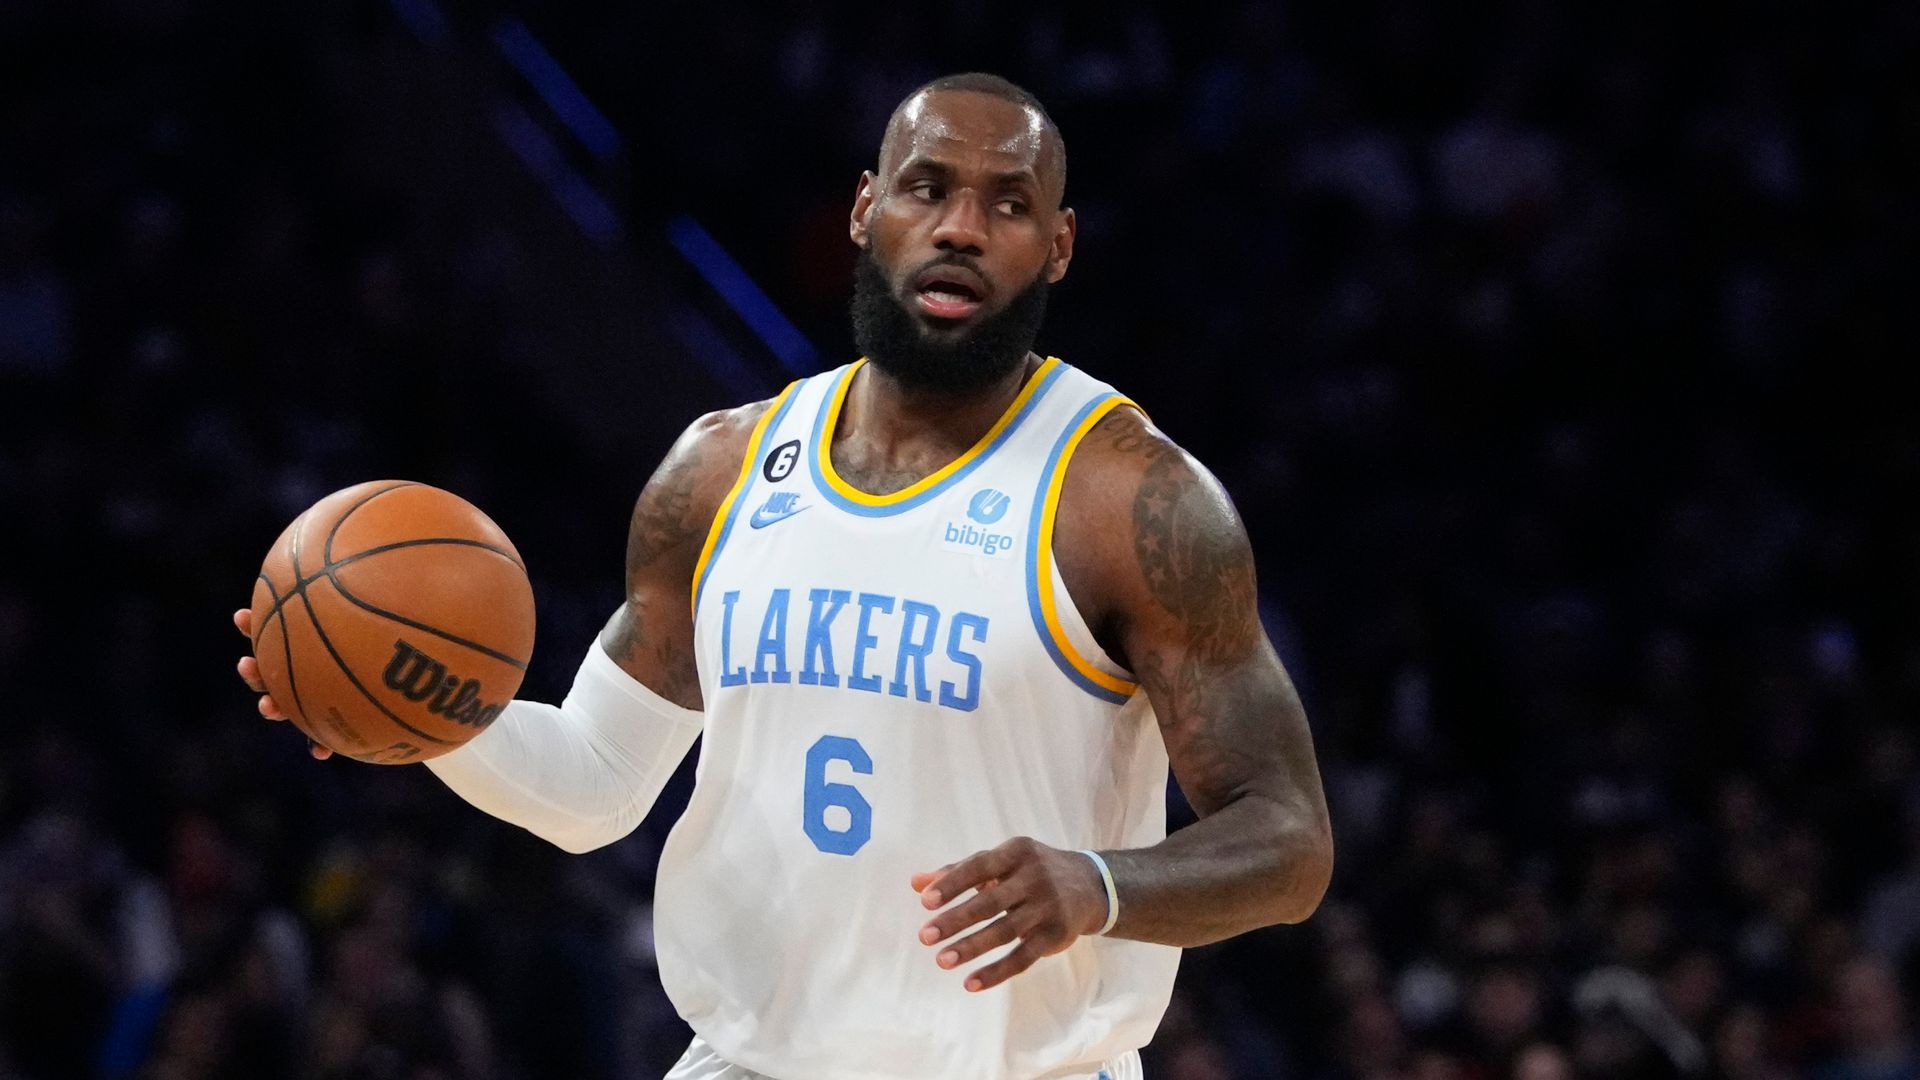 Week 17 predictions: LeBron momentous and trade deadline flurry